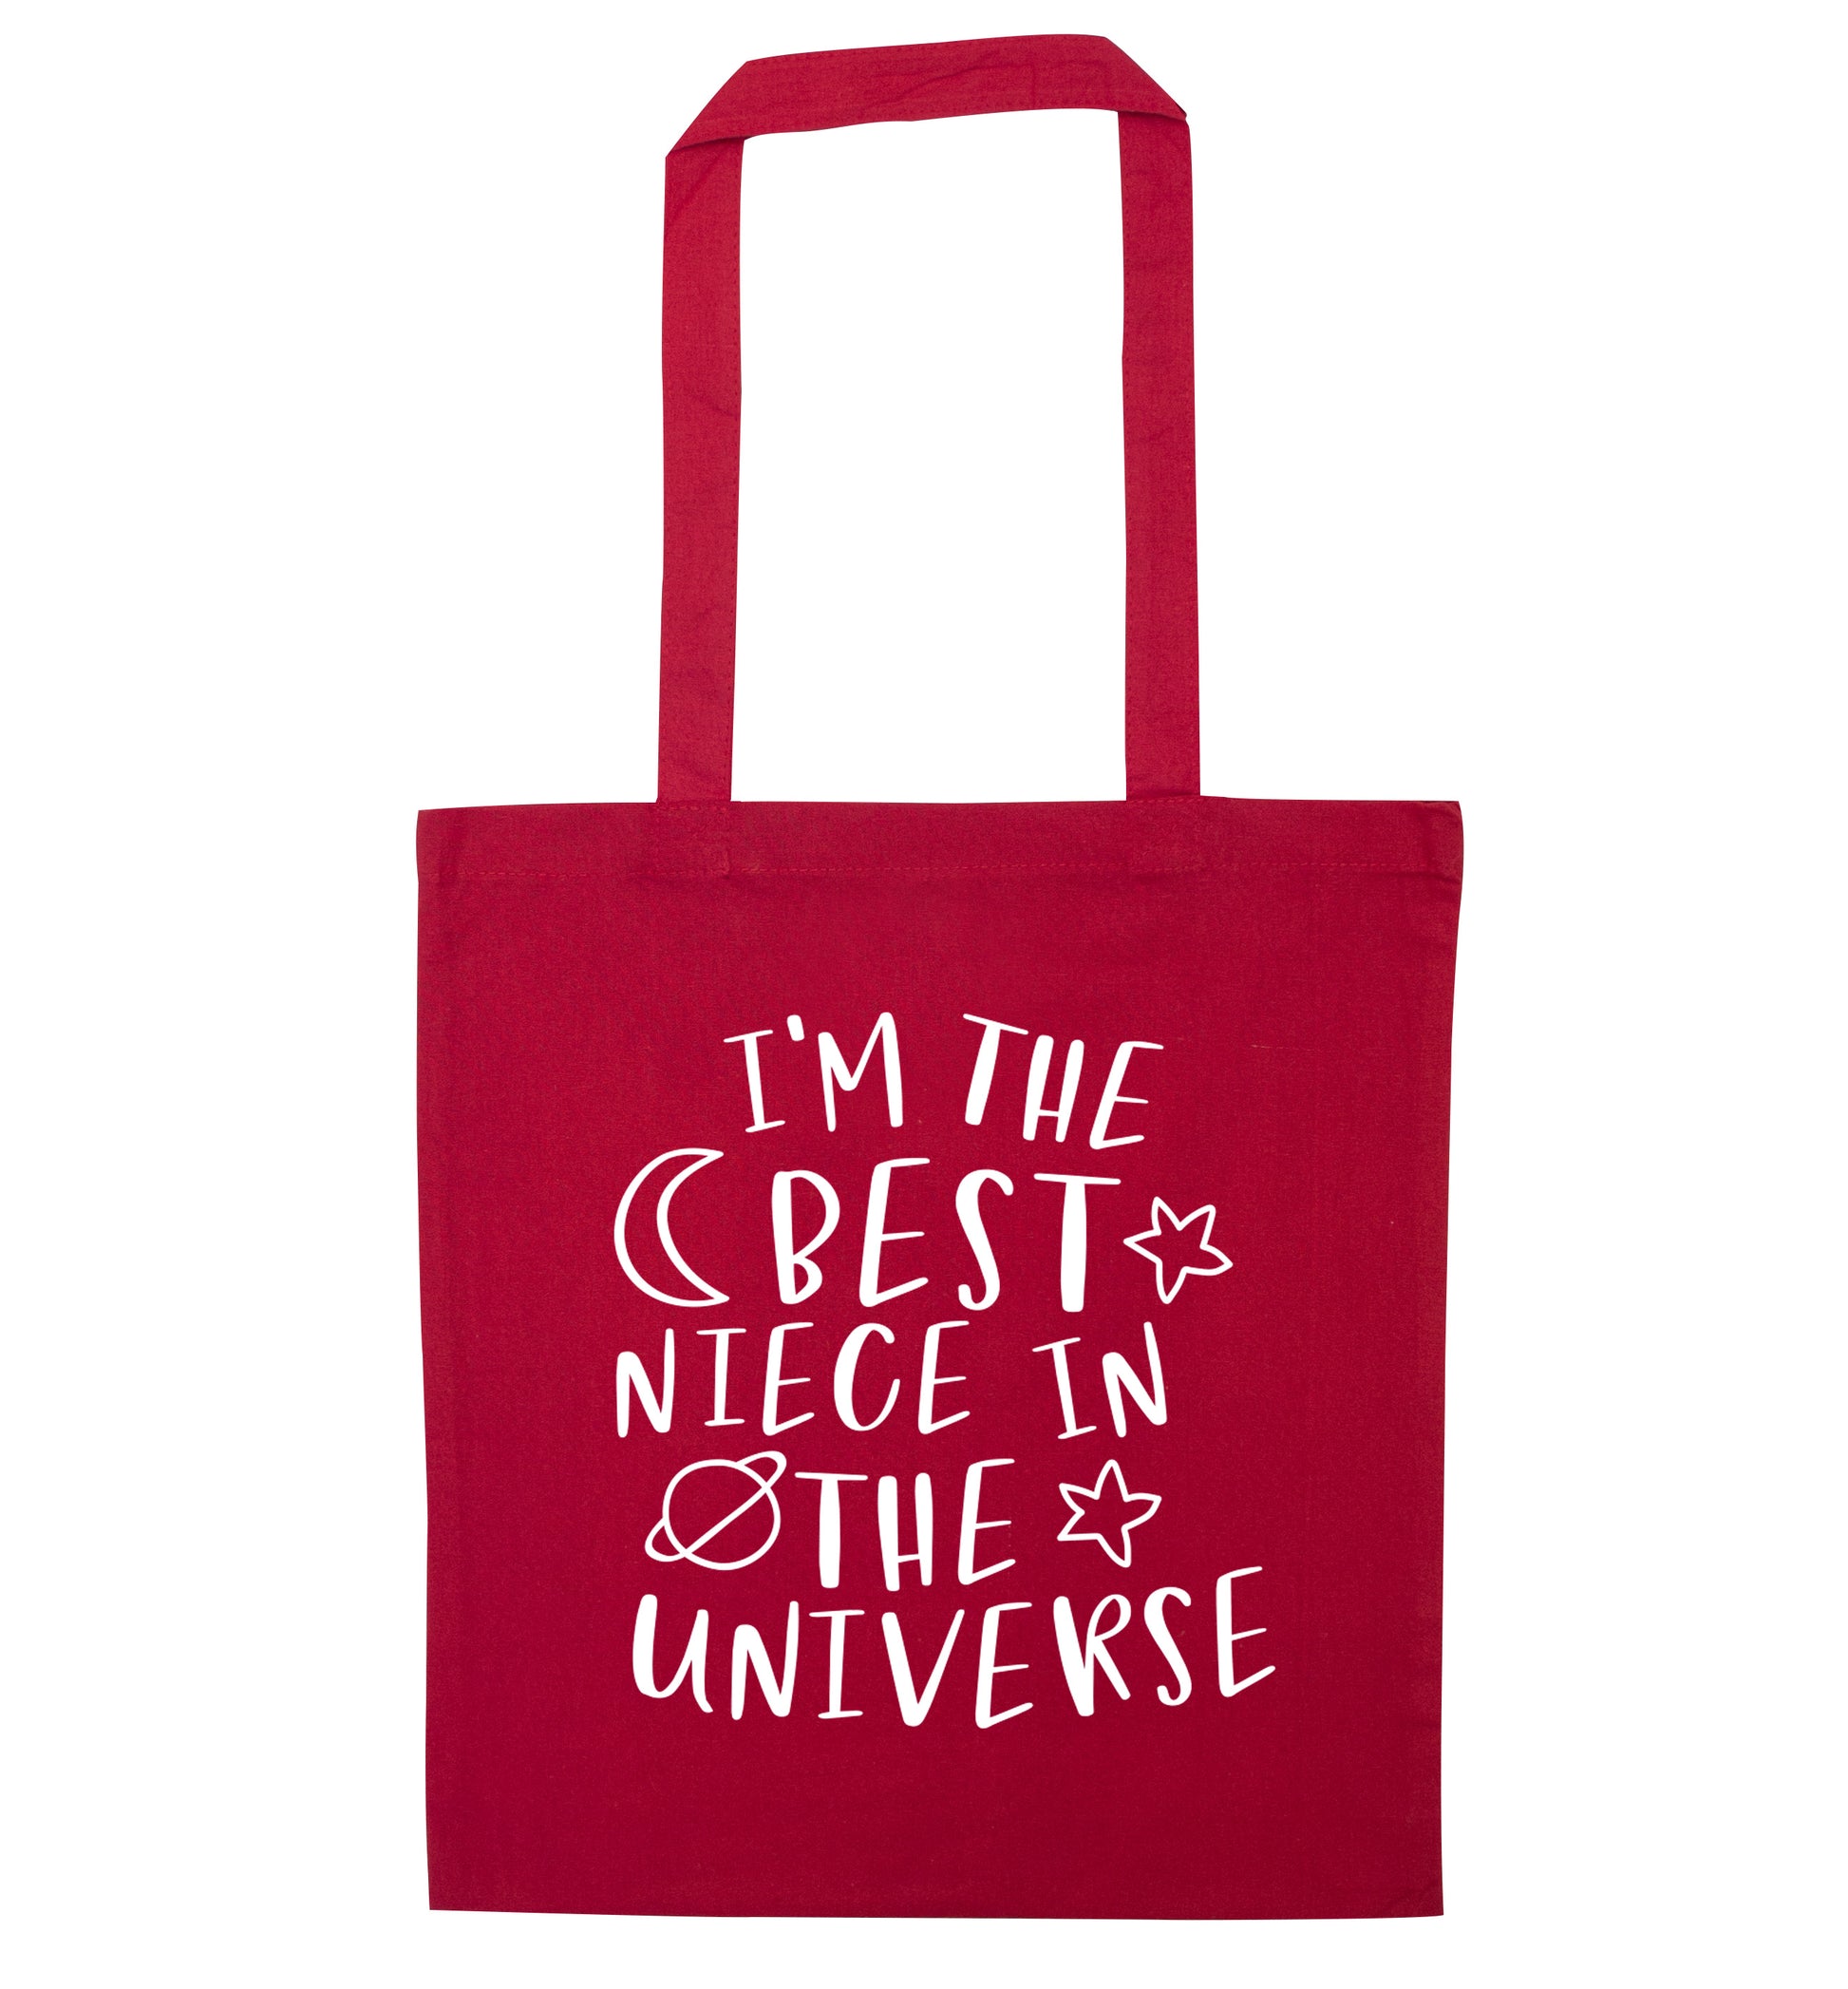 I'm the best niece in the universe red tote bag